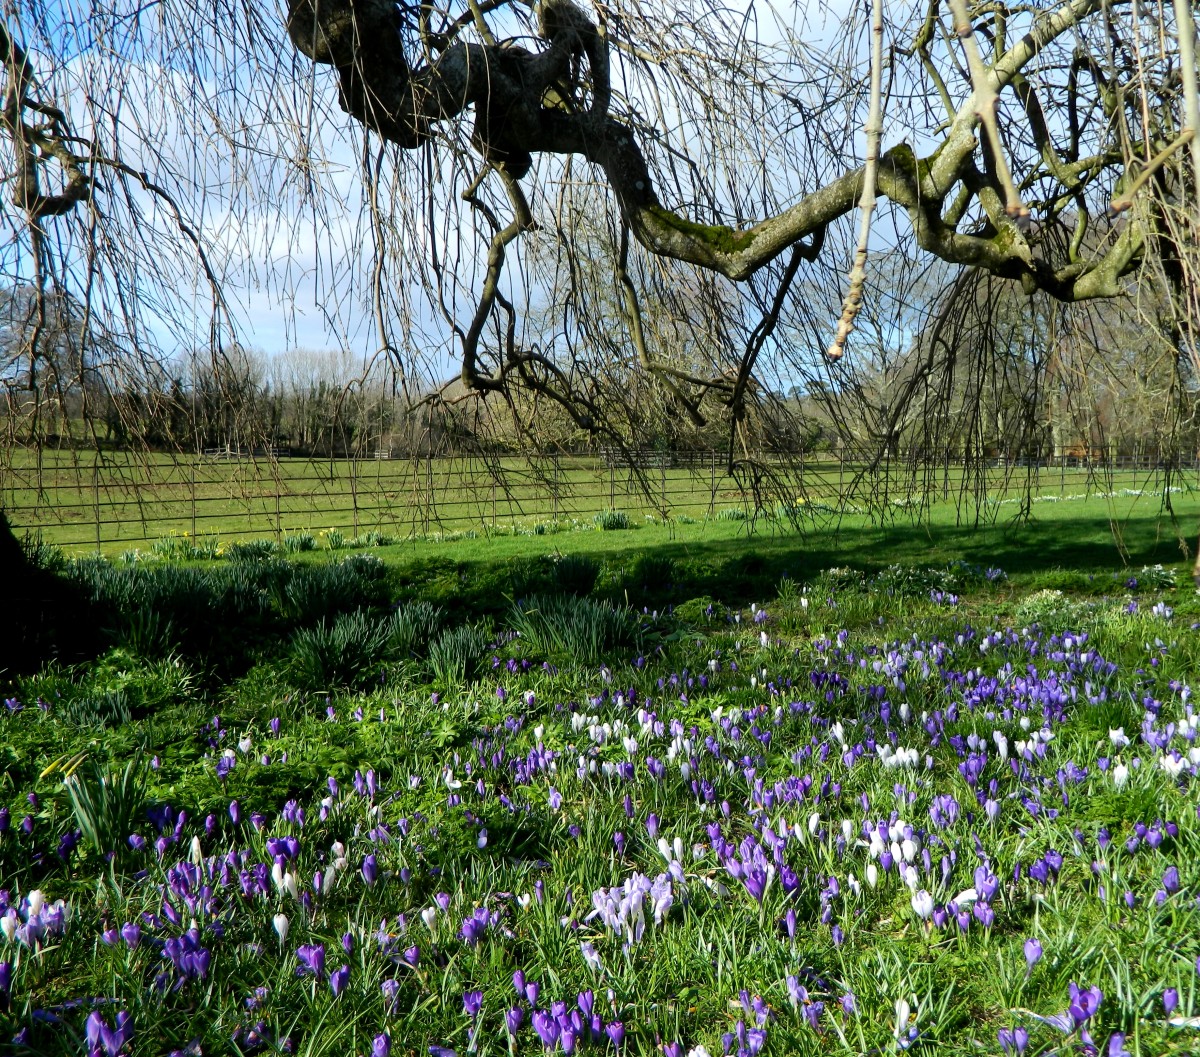 Crocus lawns are easy to maintain and only get more beautiful as the years go on.